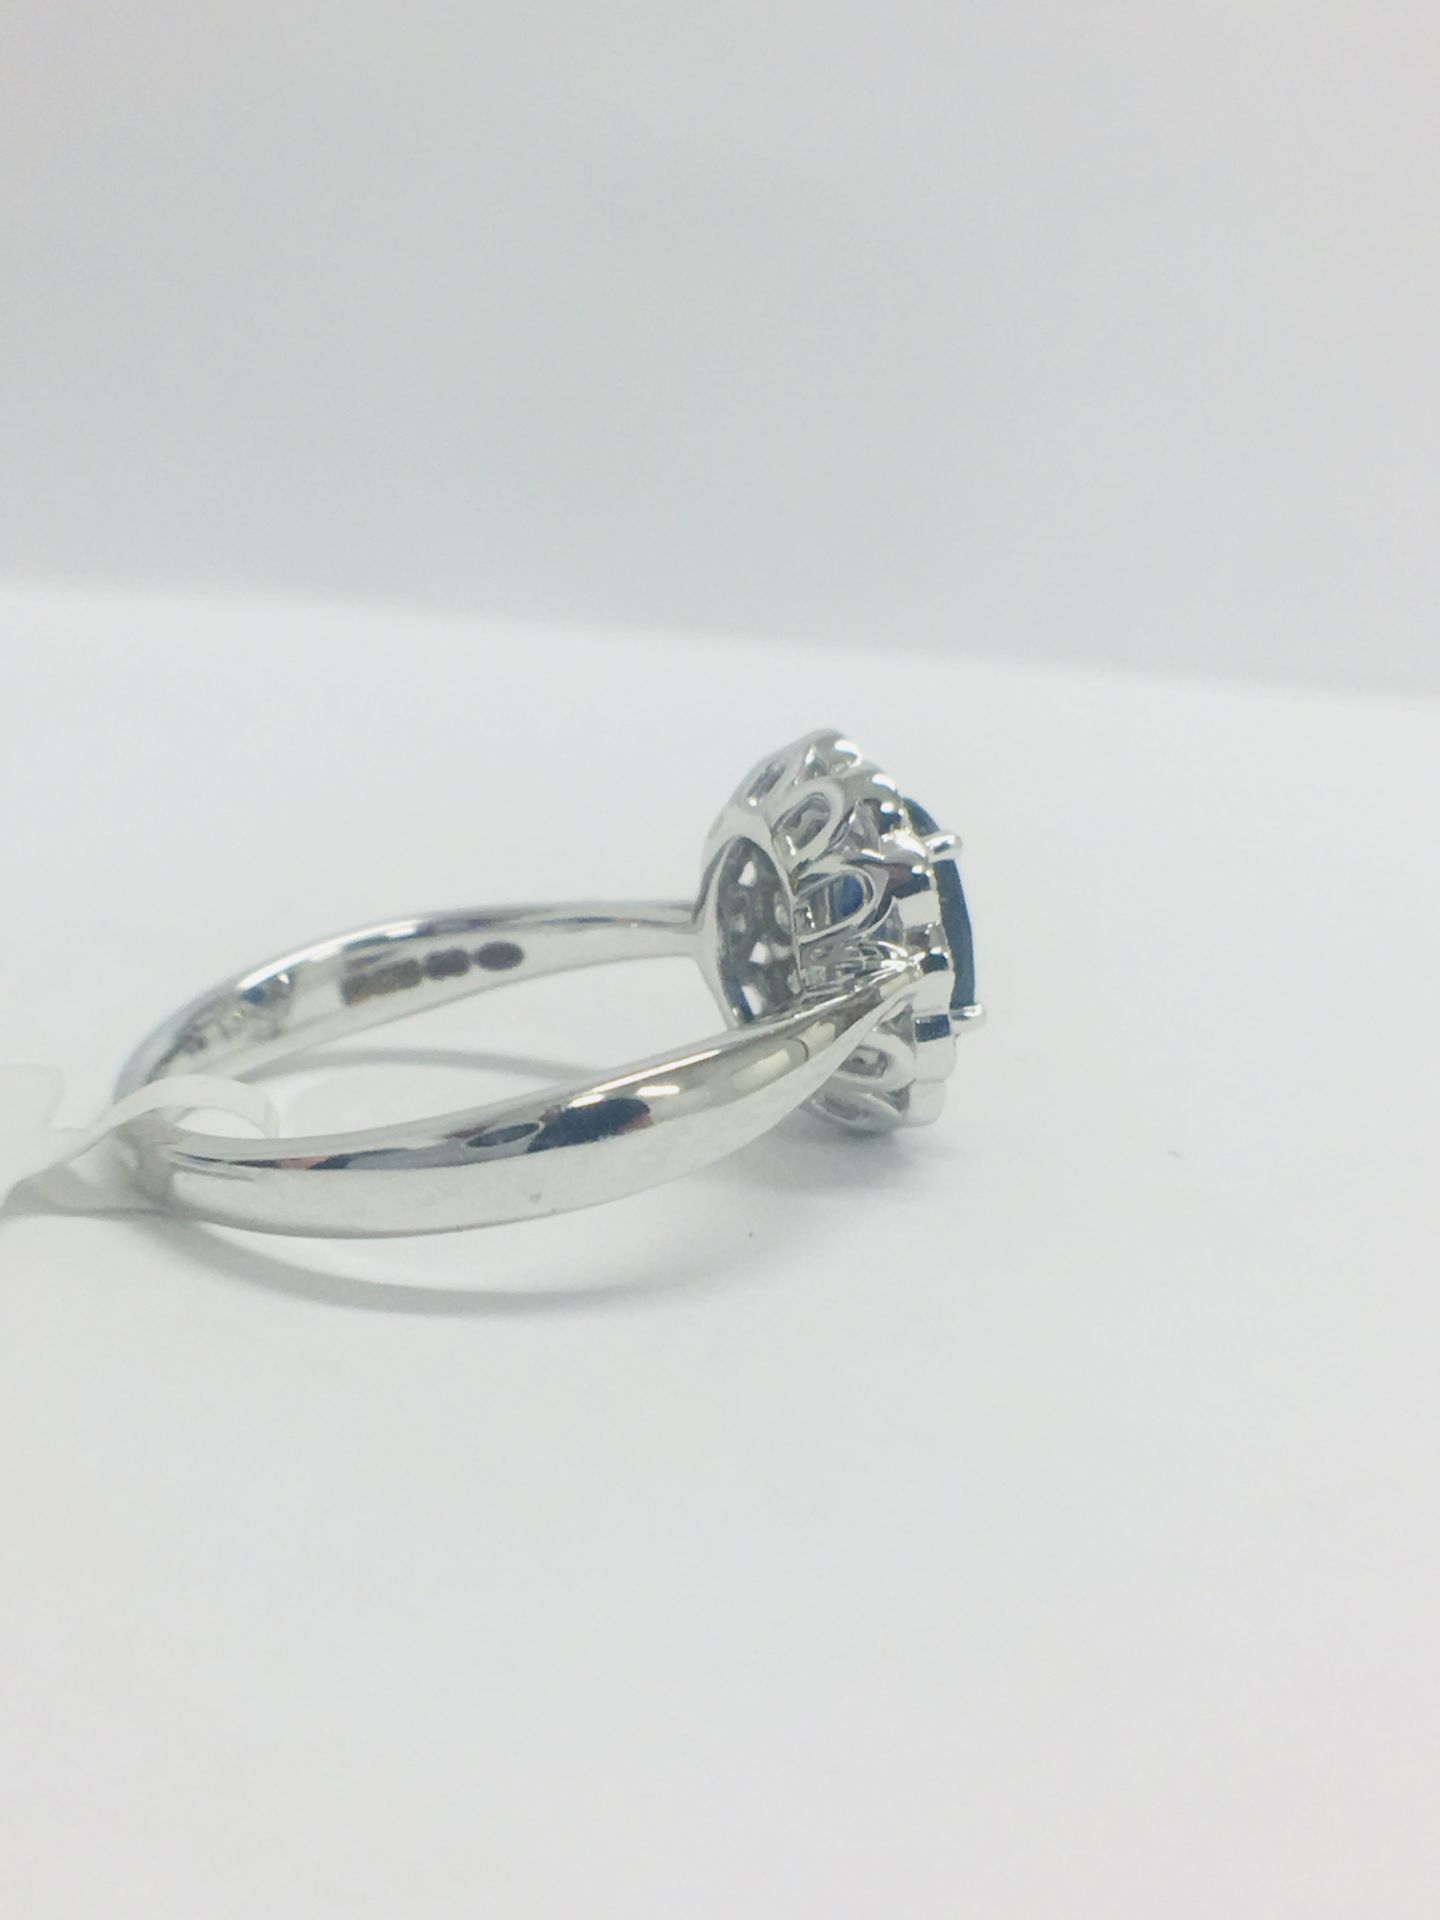 18ct White Gold Sapphire Diamond Cluster Ring - Image 6 of 9